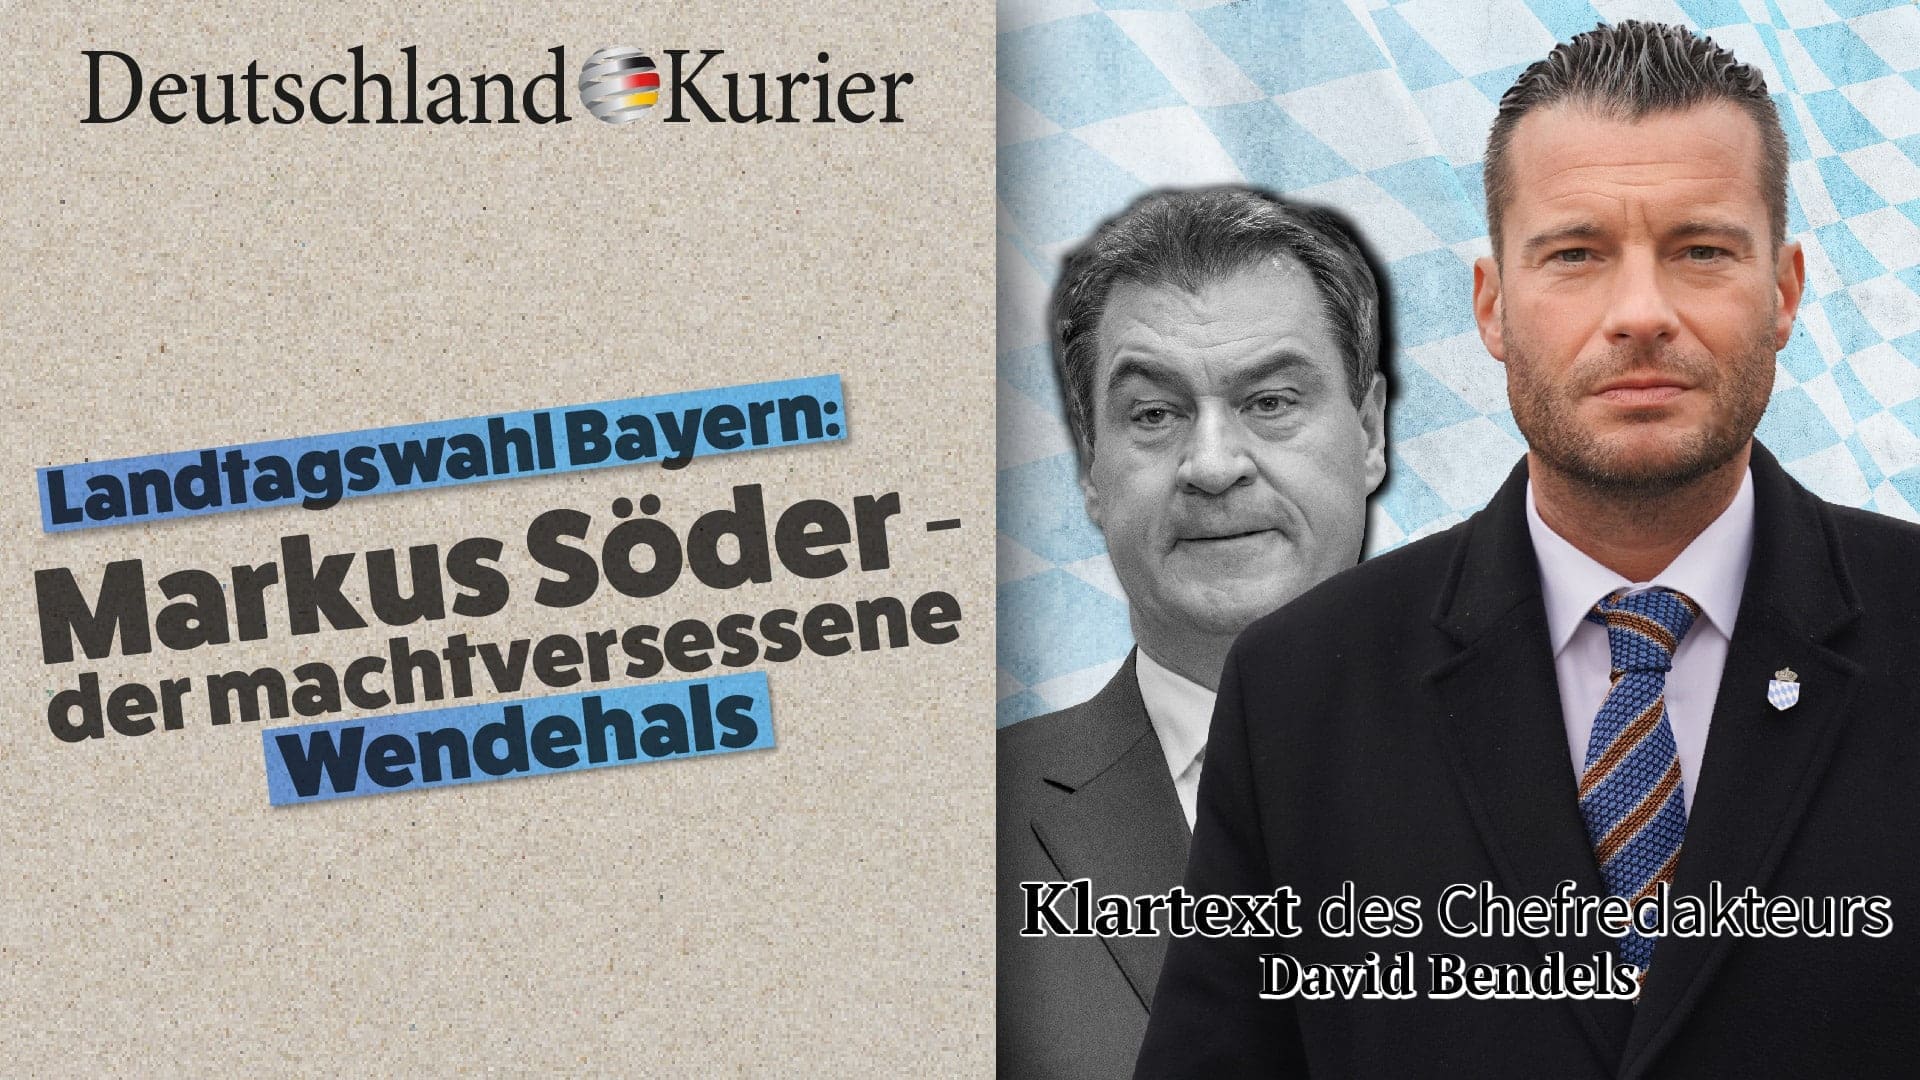 bayern’s-state-election:-markus-soeder-—-the-power-hungry-turncoat